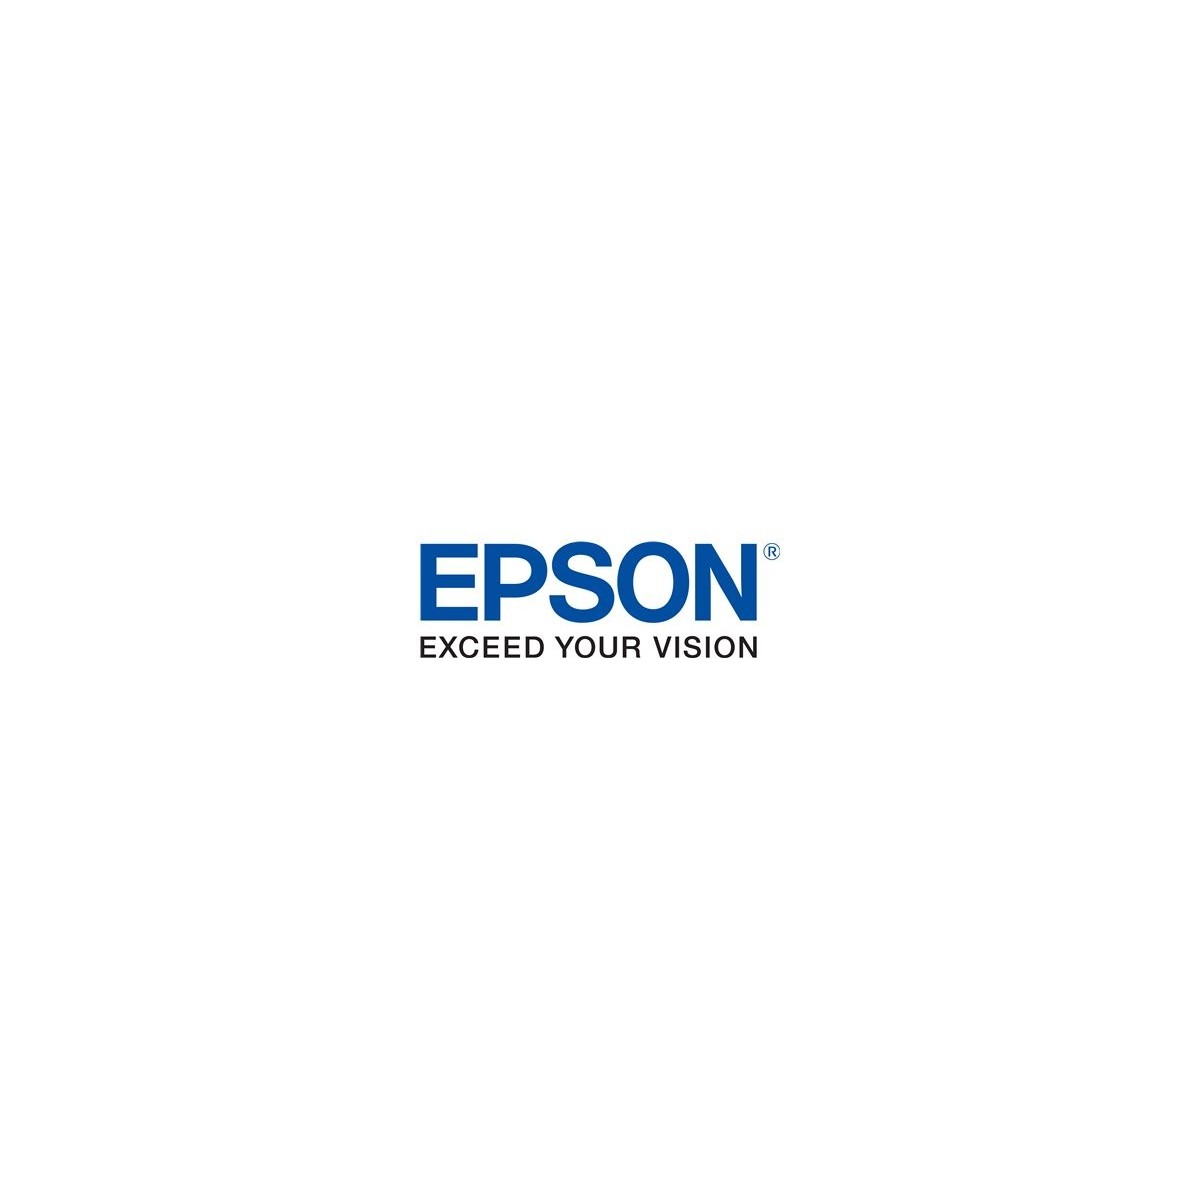 Epson 550 Sheet Paper Cassette Unit for N3000 - Paper tray - Epson - EPL-N3000 - 500 sheets - Blue - White - China